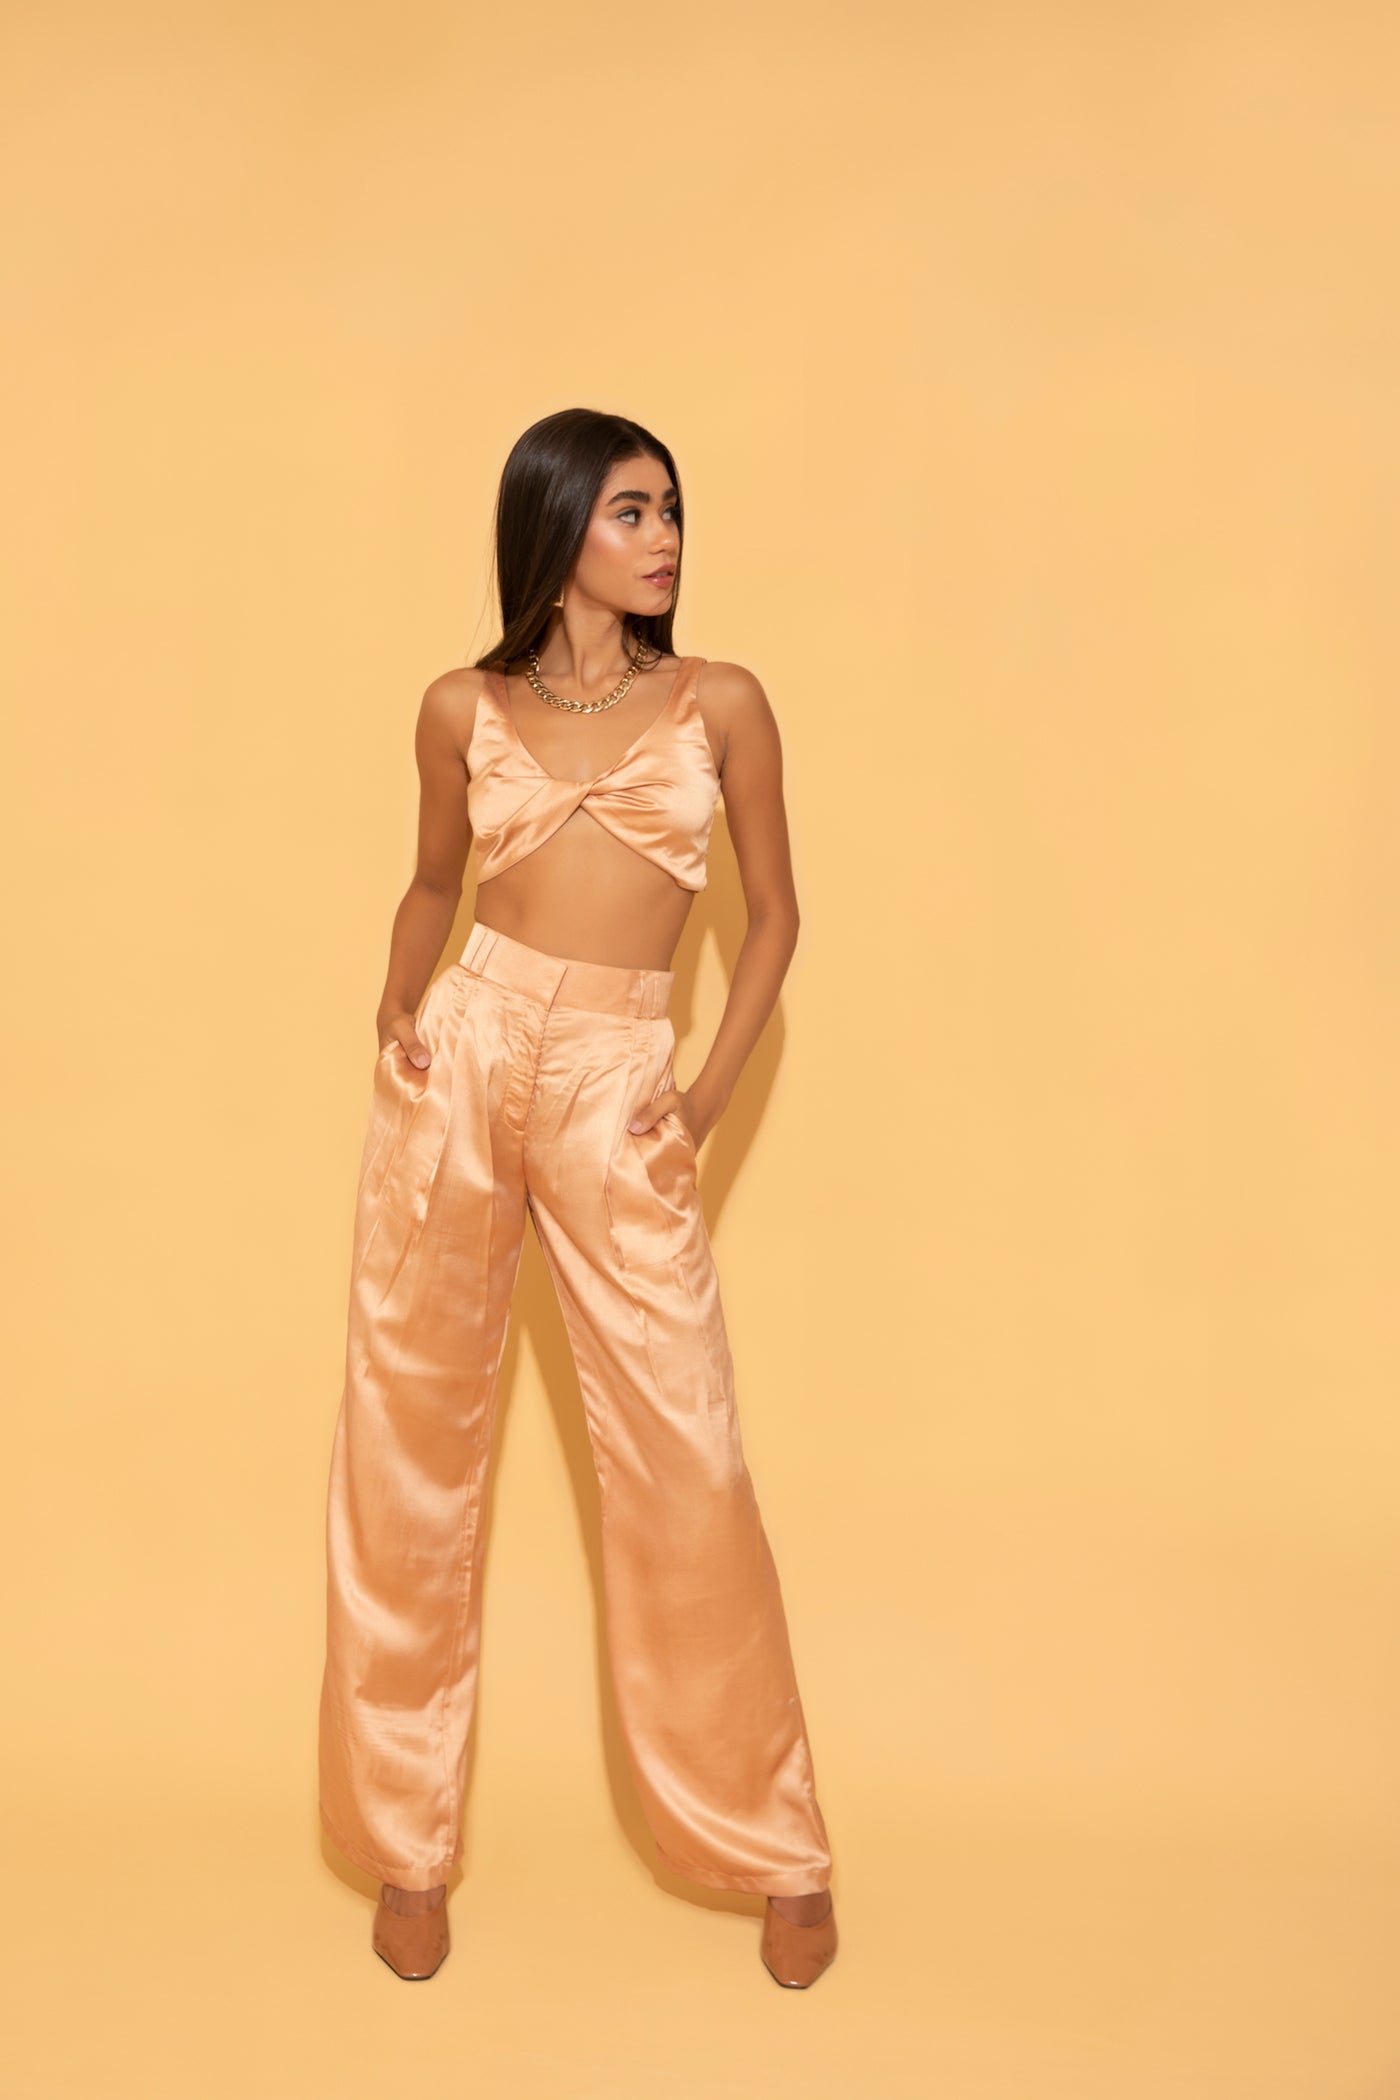 Wide leg peach satin pants paired with peach crop top from Torqadorn